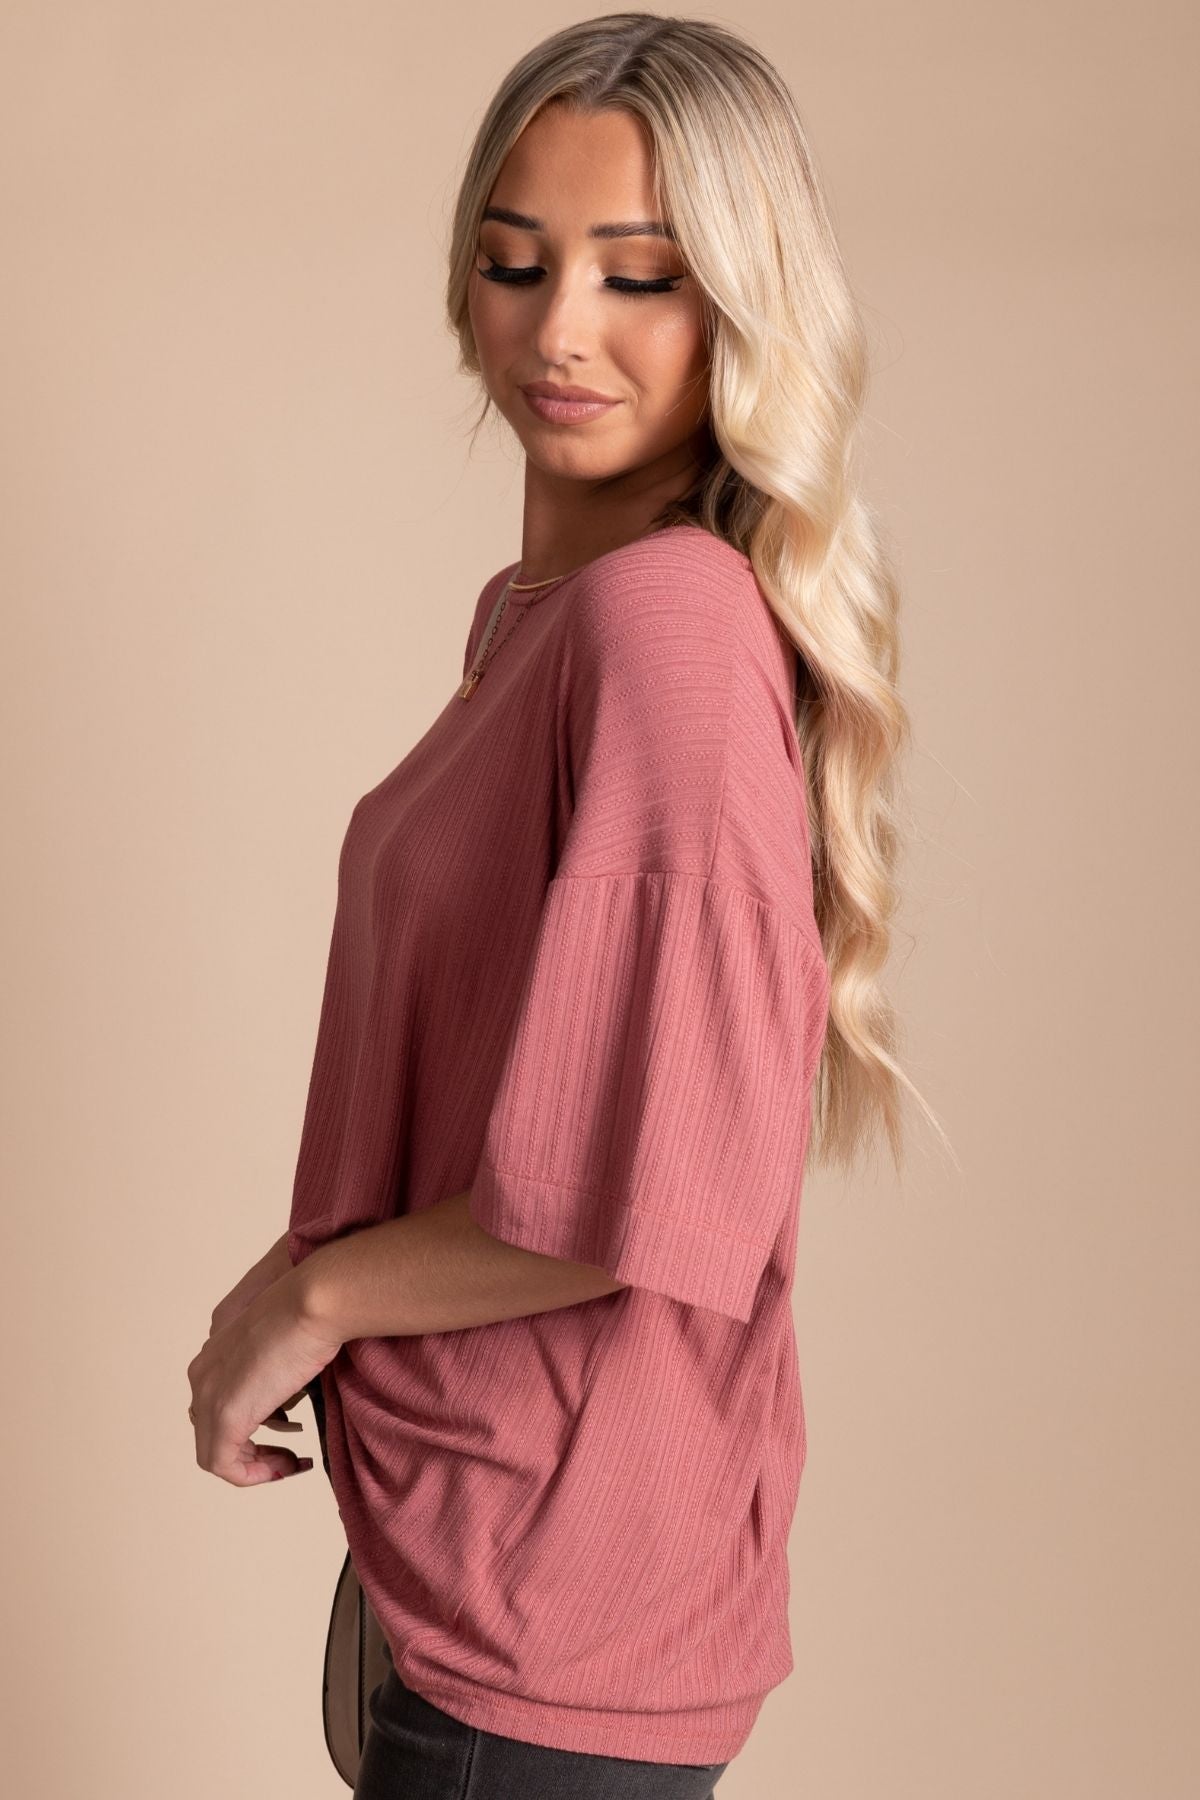 Pink Cute and Comfortable Boutique Tops for Women